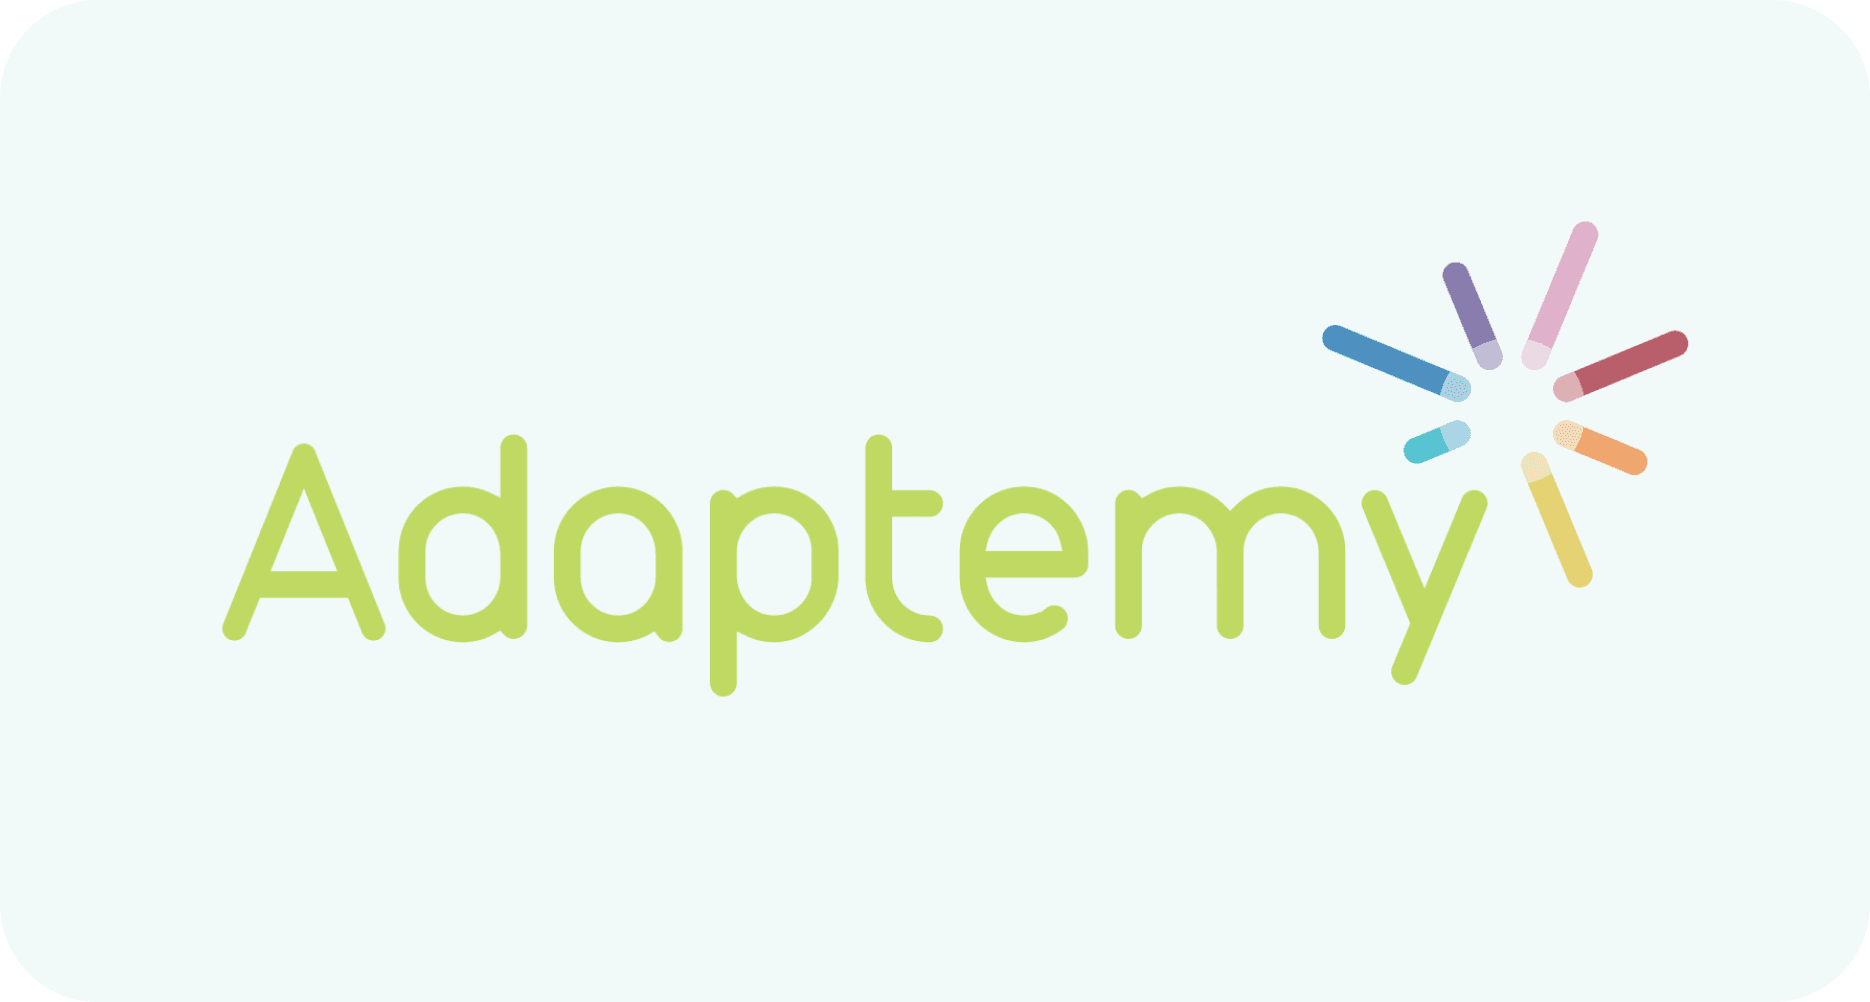 Adaptemy Logo as an app that features adaptive learning